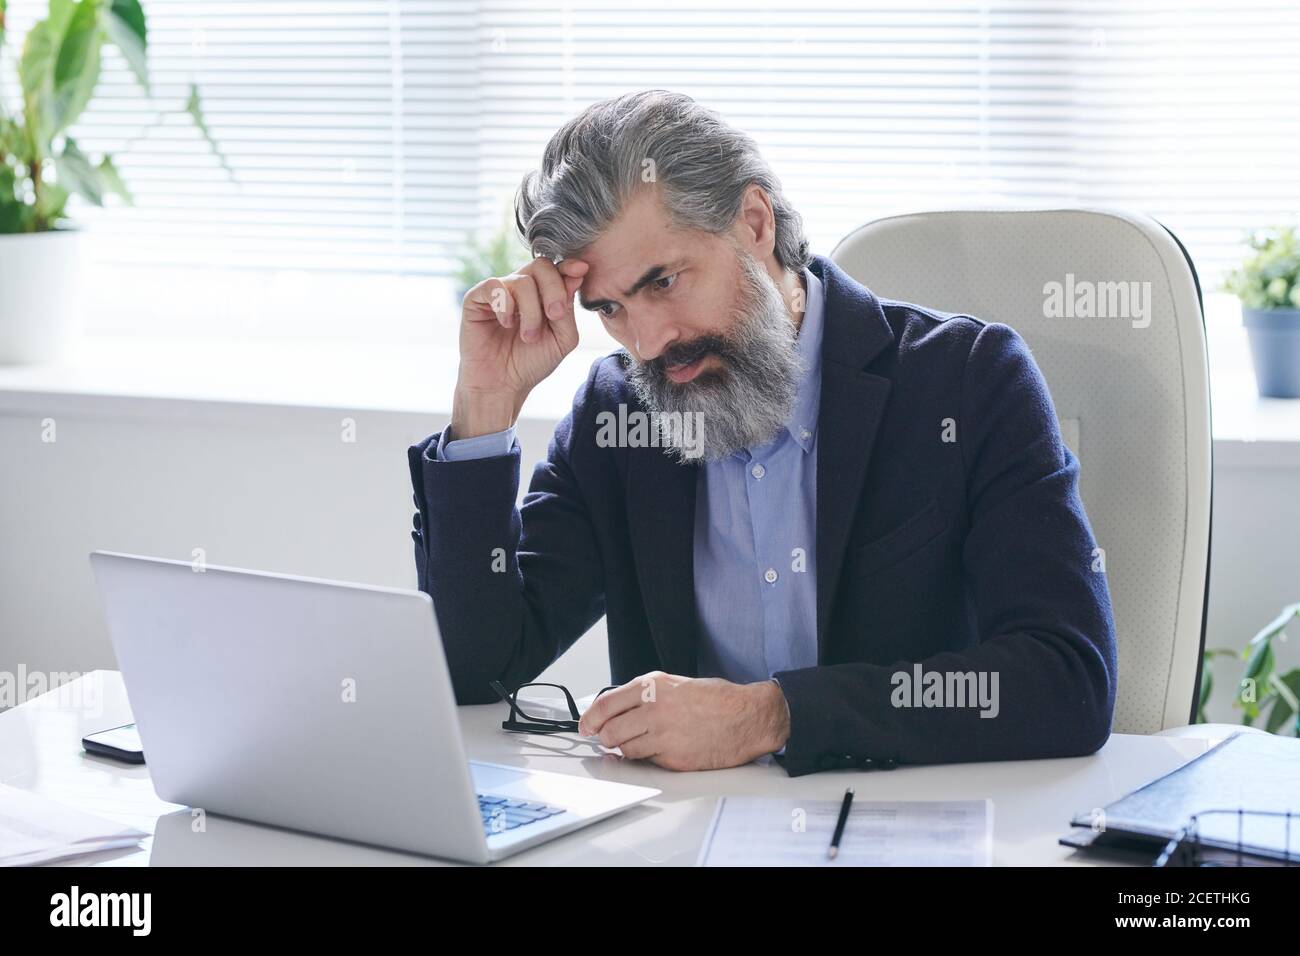 Portrait of concentrated mature male office worker wearing eyeglasses sitting at office desk and reading information on laptop Stock Photo